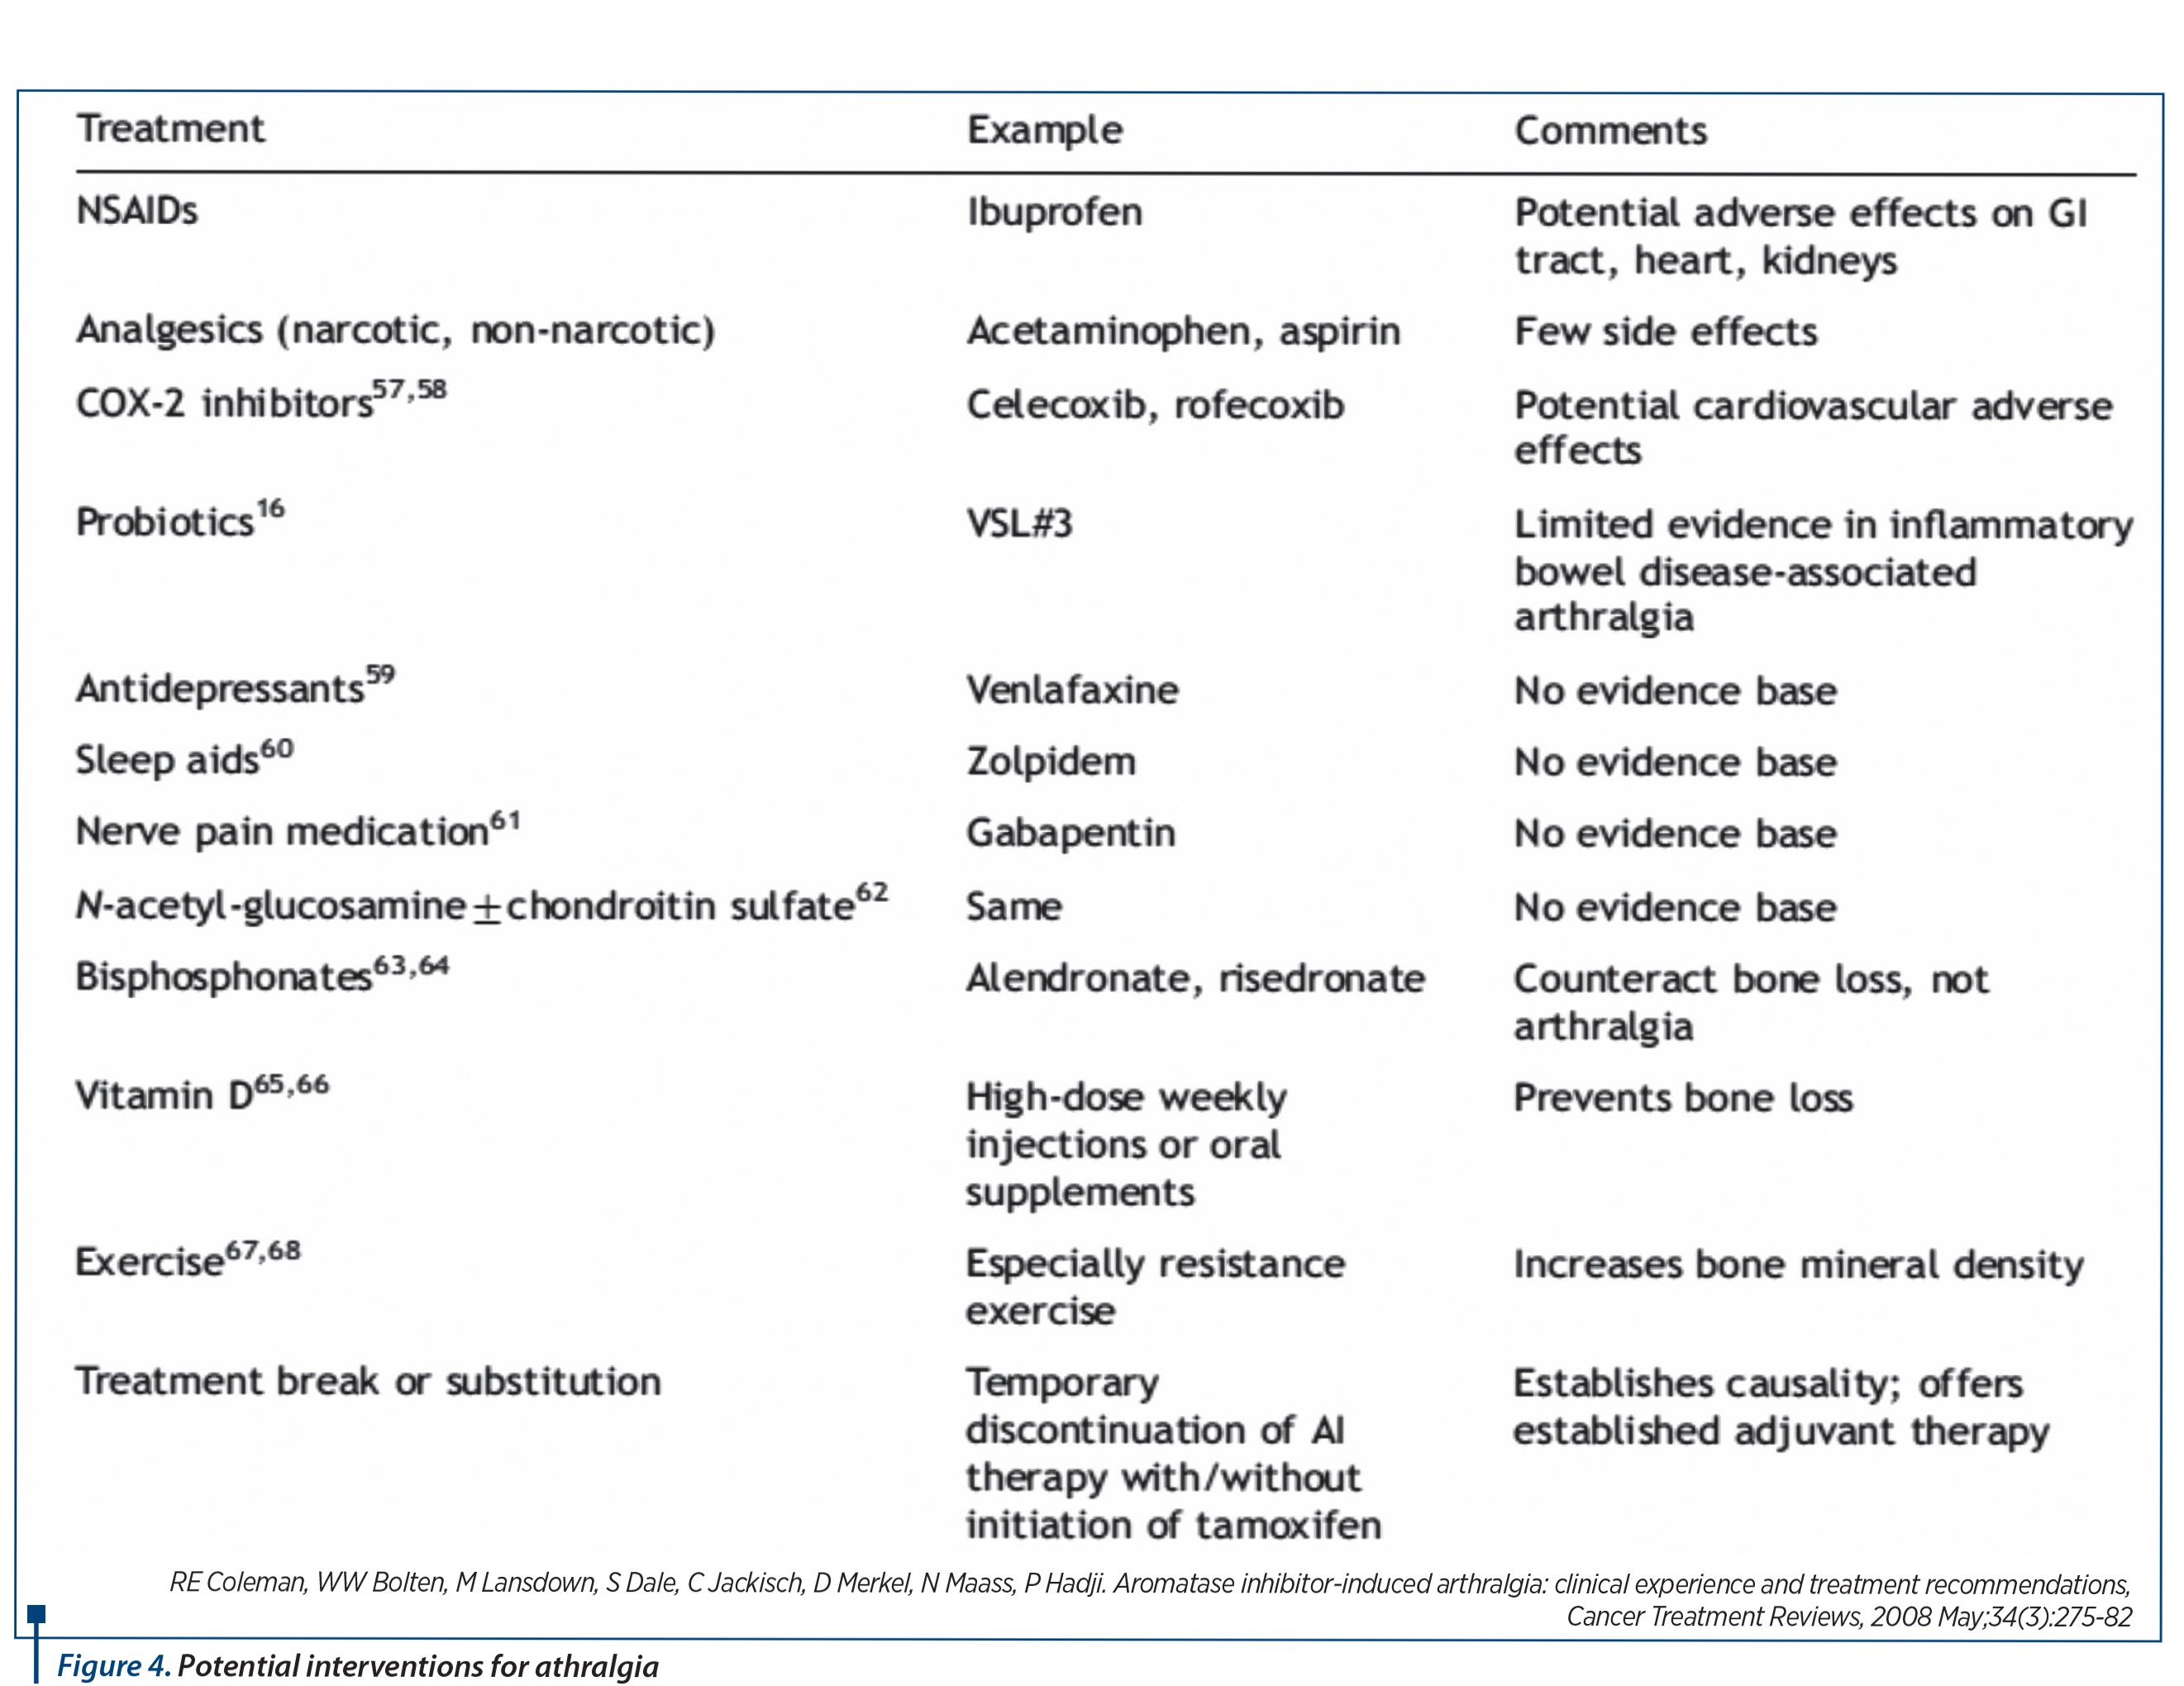 Figure 4. Potential interventions for athralgia